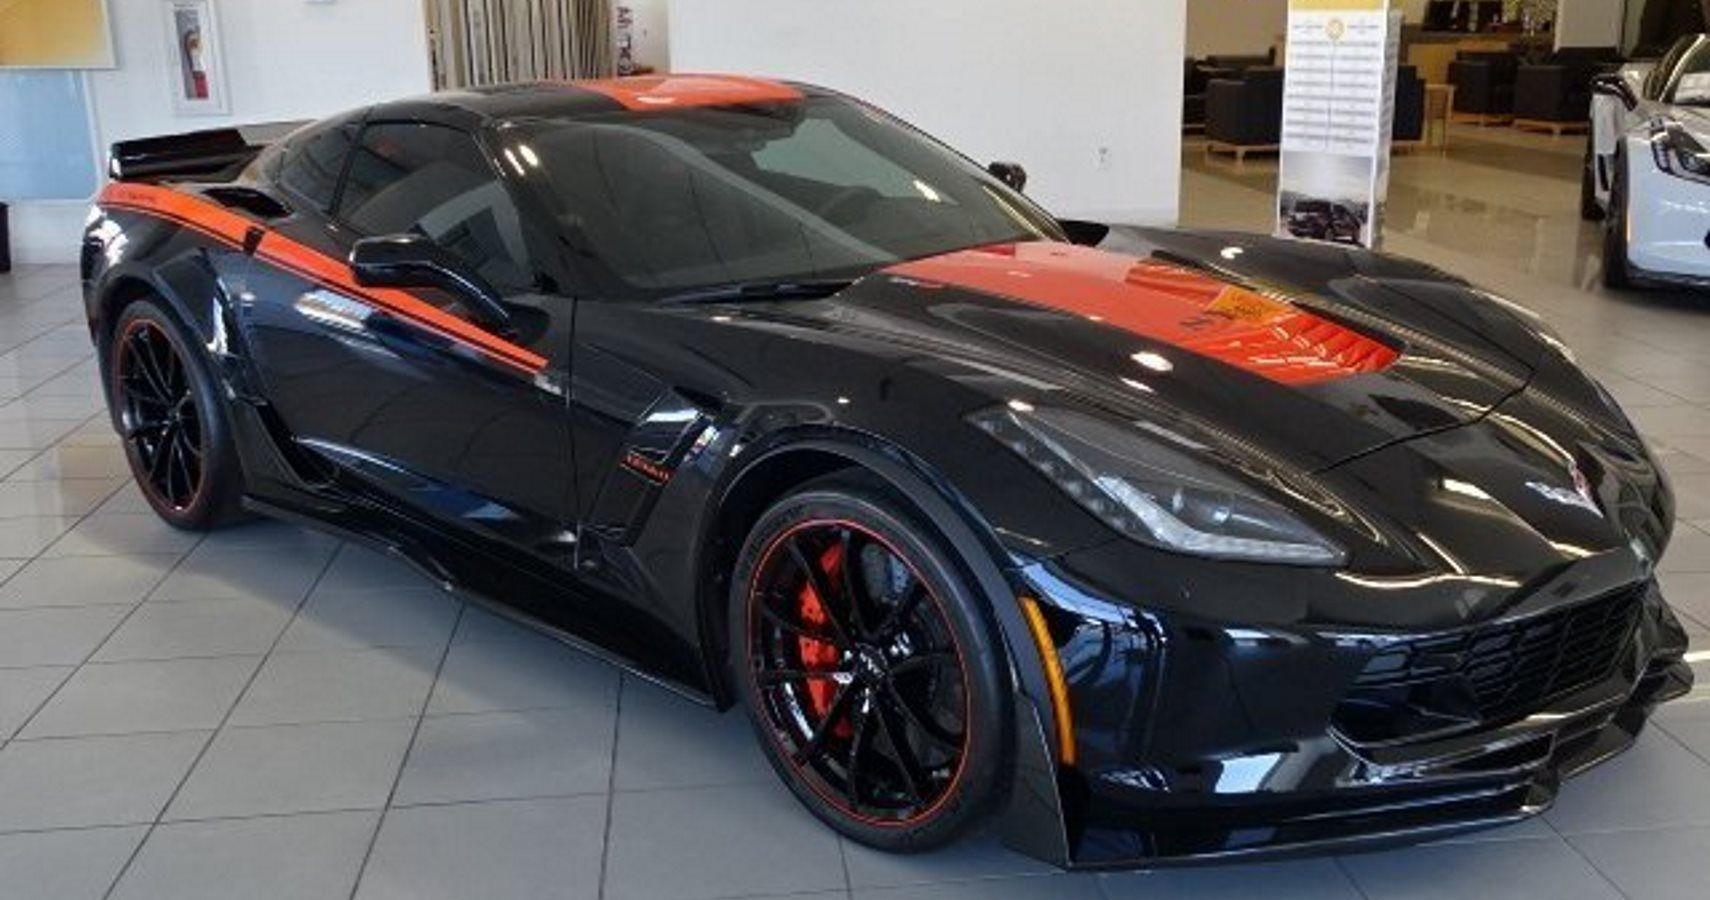 Used Corvette Up For Sale For Crazy Price